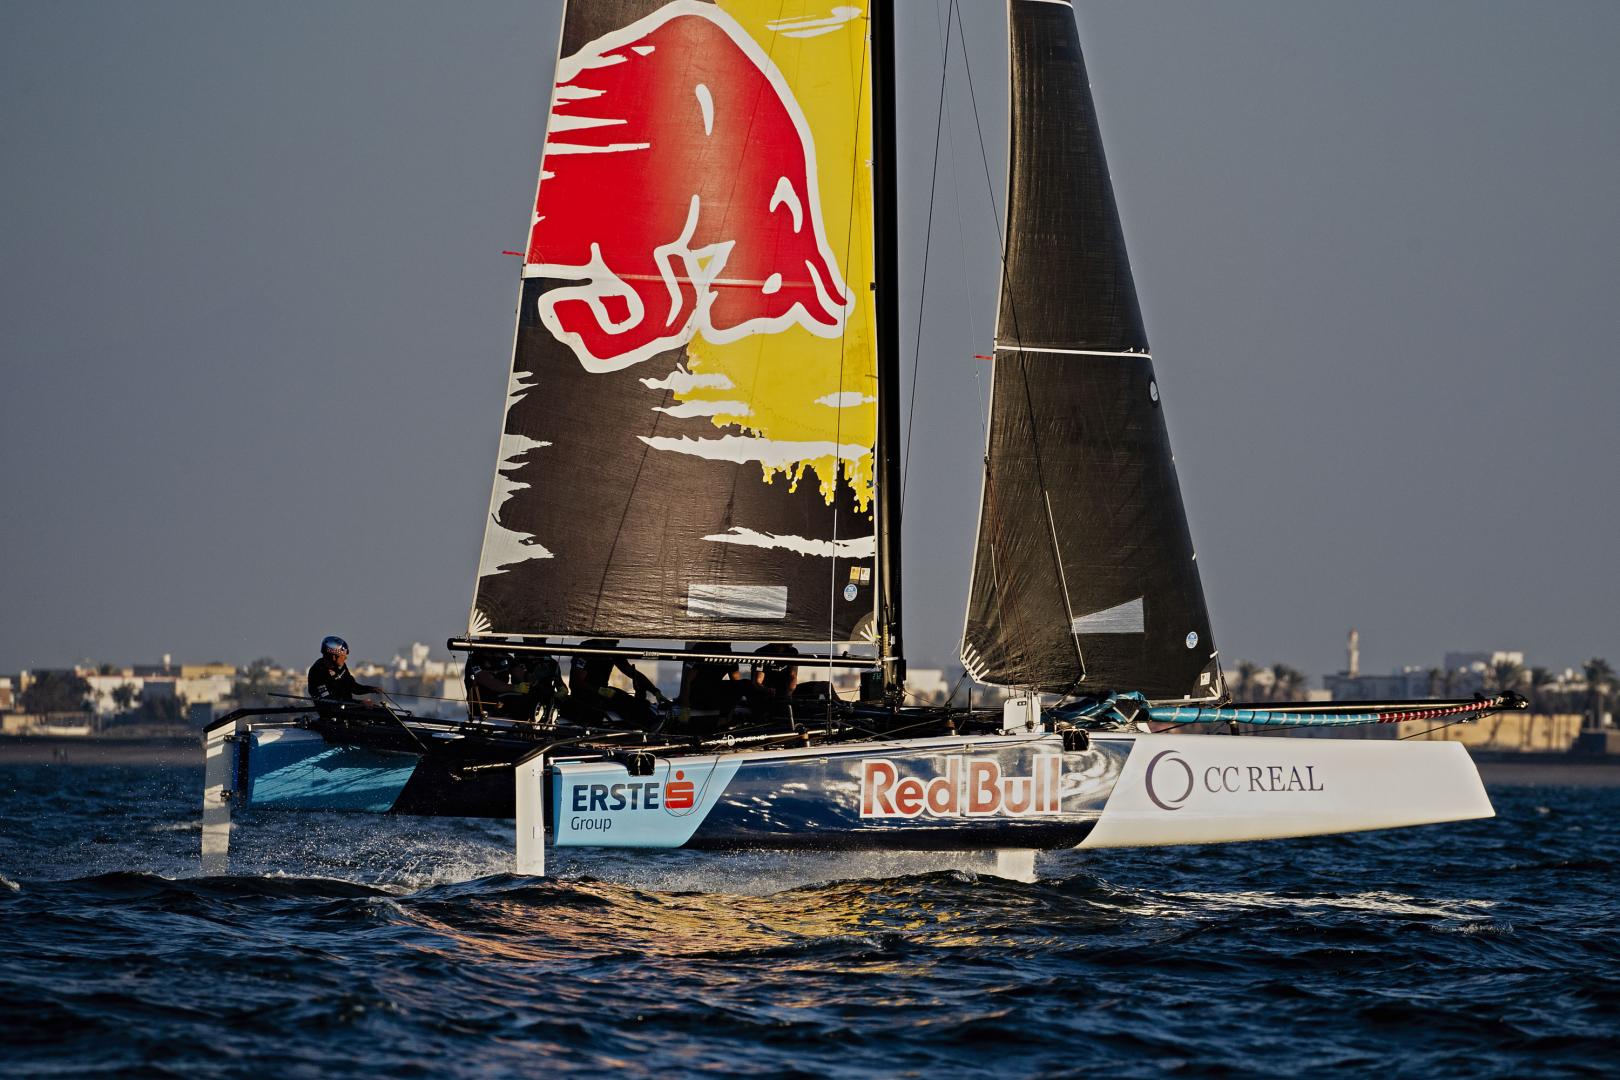 Red Bull Sailing Team in their new colours. Photo: Samo Vidic/Red Bull Content Pool  